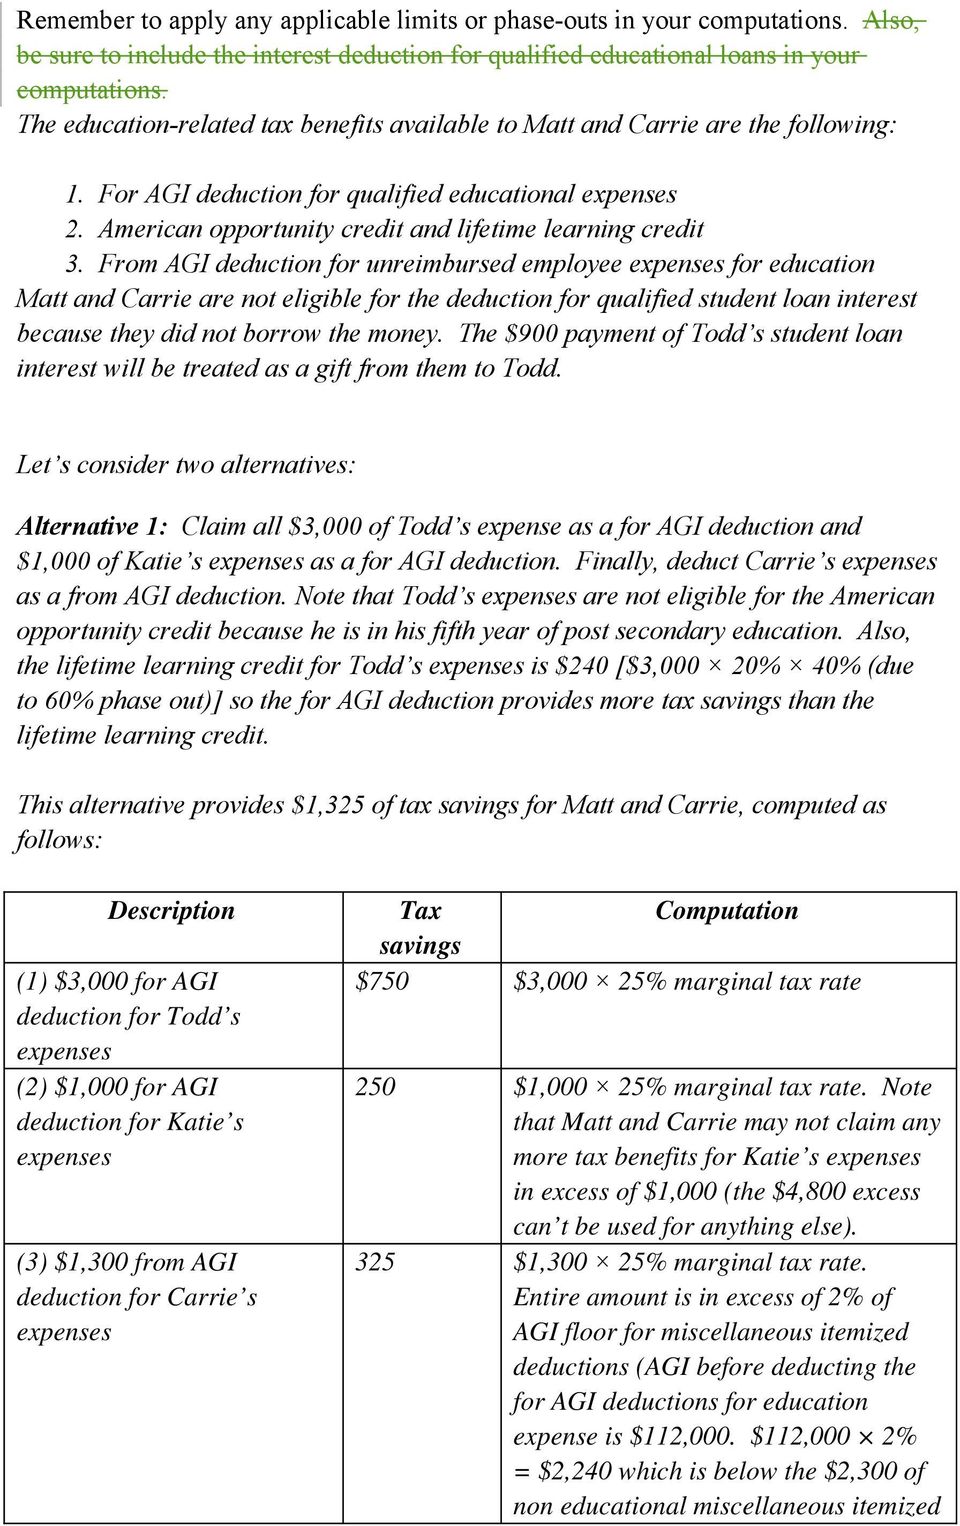 From AGI deduction for unreimbursed employee for education Matt and Carrie are not eligible for the deduction for qualified student loan interest because they did not borrow the money.